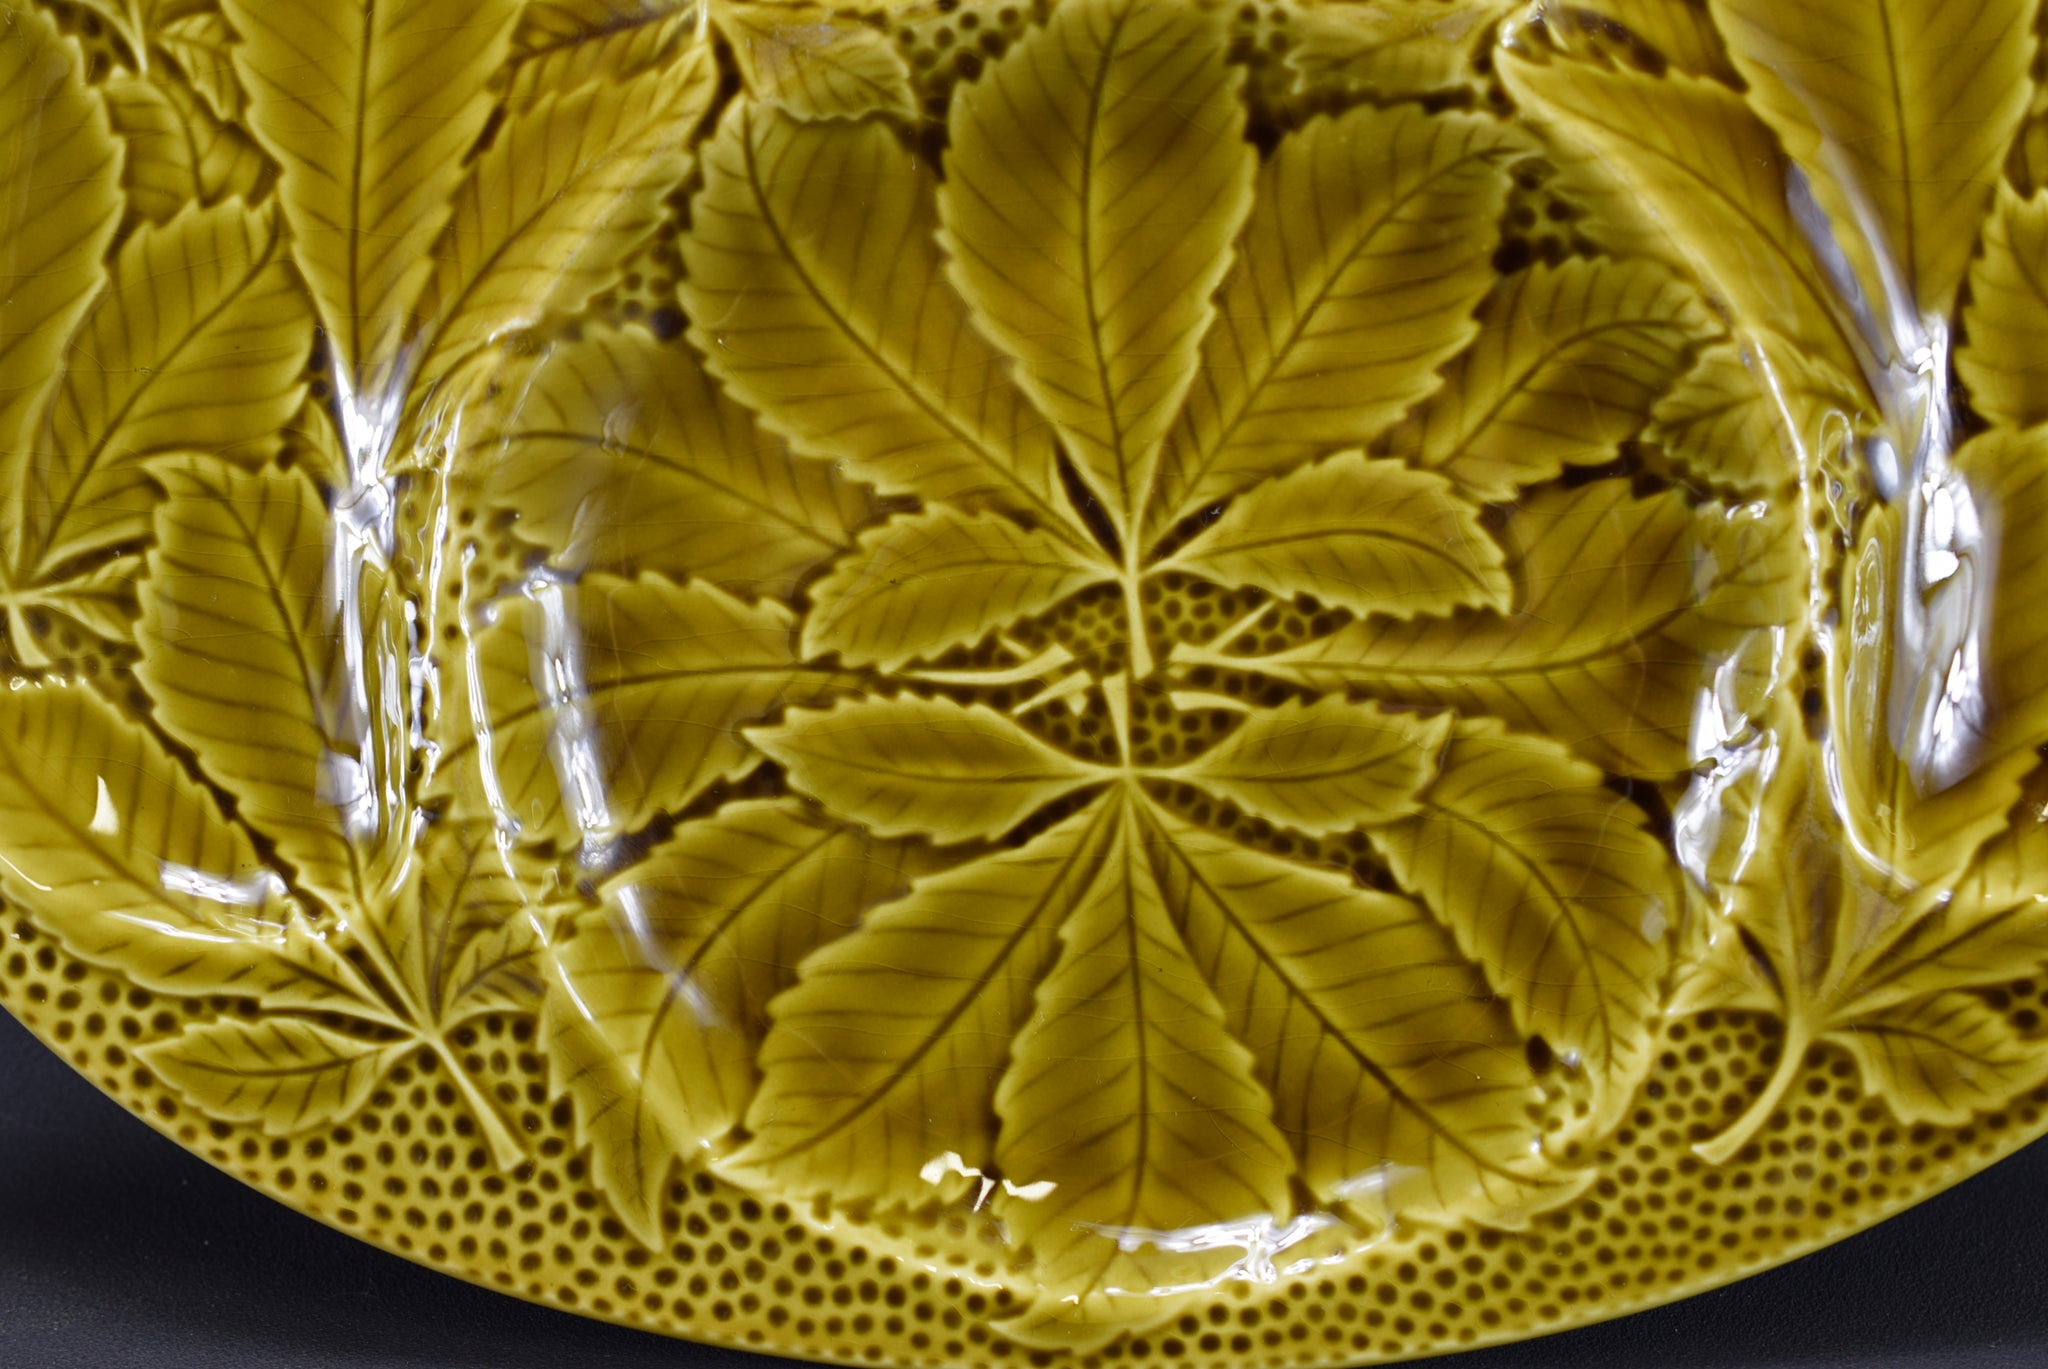 Green Majolica Leaf Plate Tray by Gien Garden House Tableware Crackers Hors d'Oeuvre Appetizer